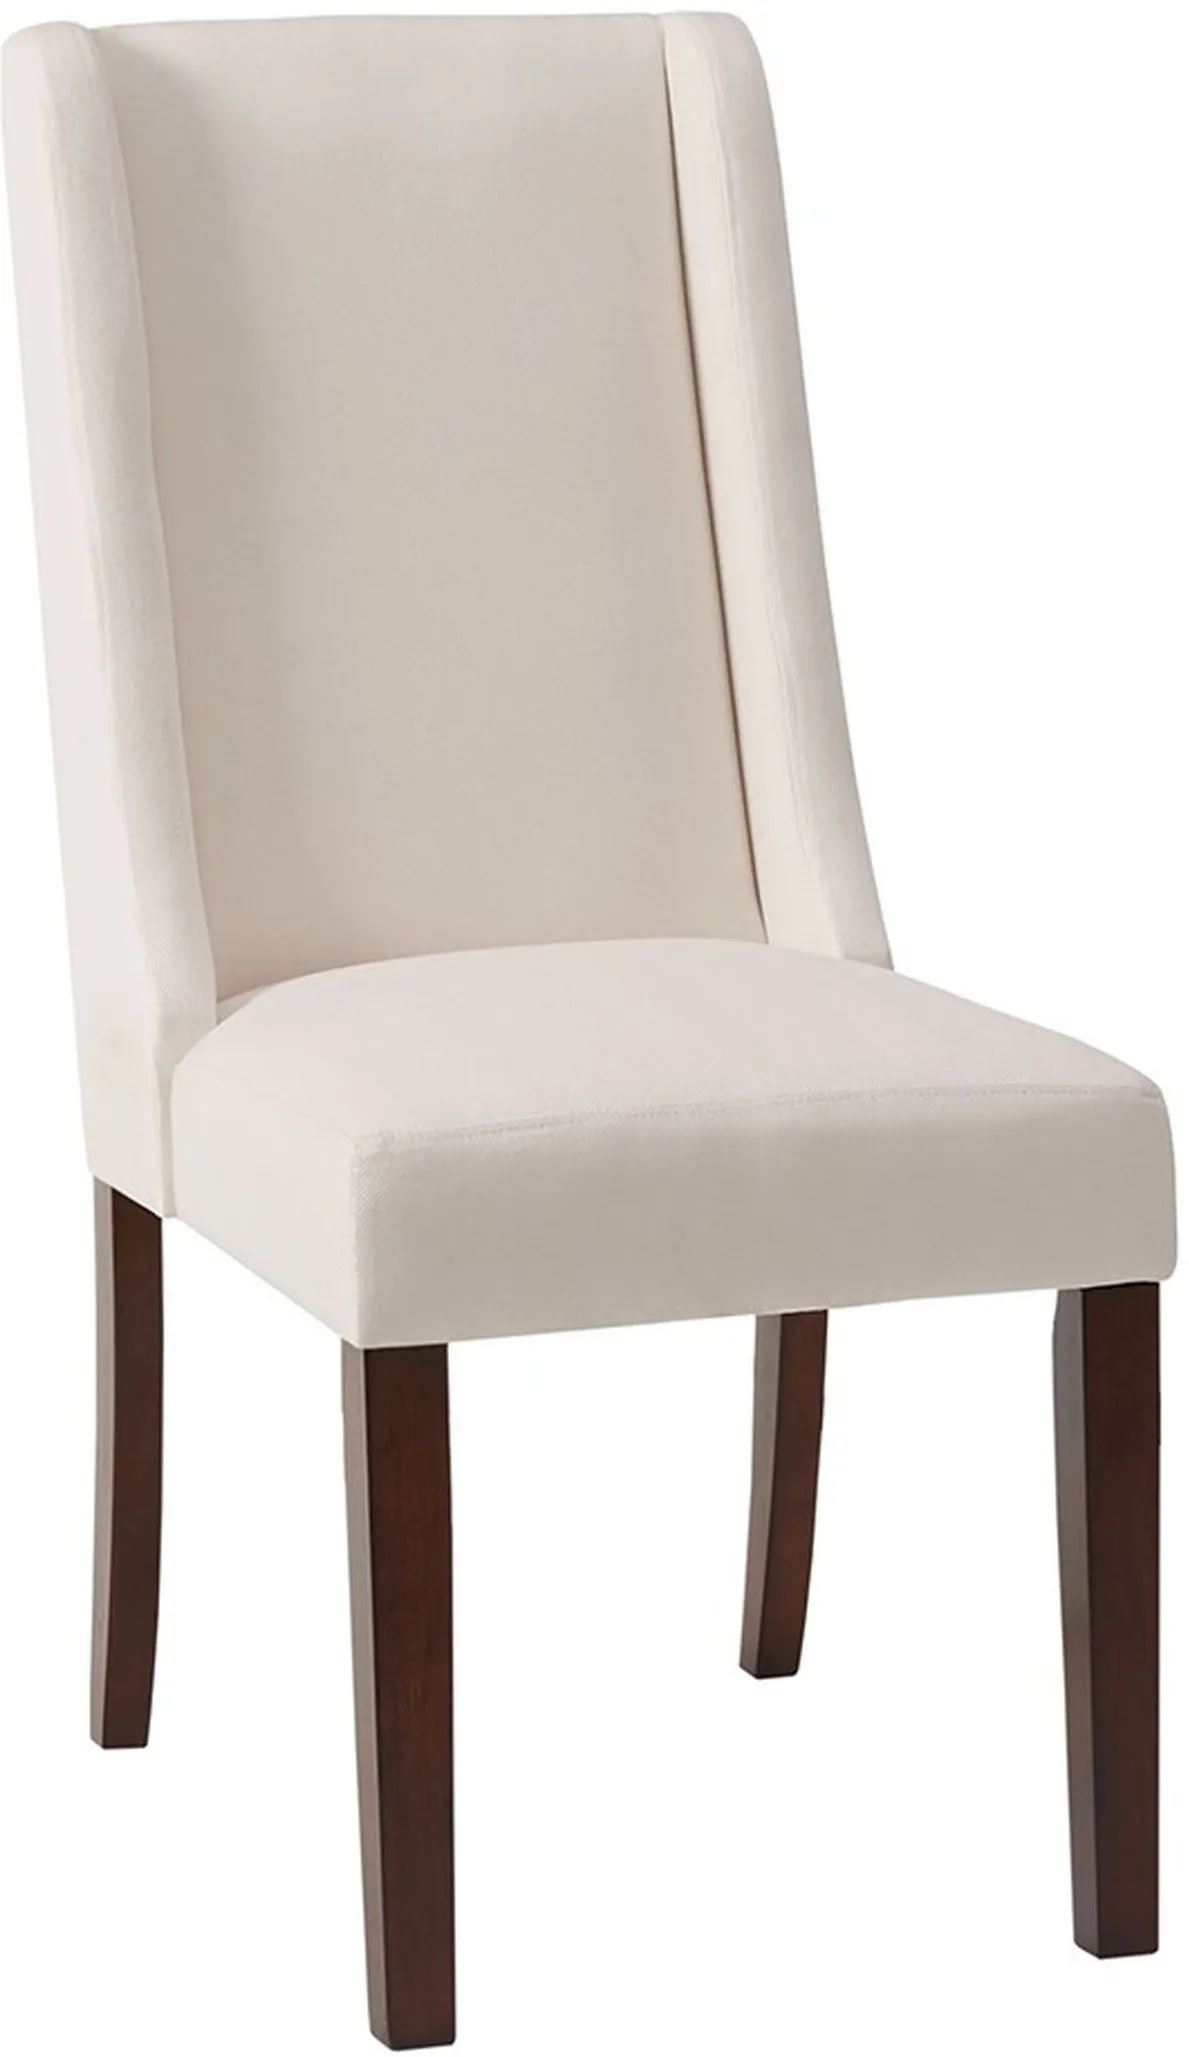 Olliix by Madison Park Cream Brody Wing Dining Chair (Set of 2)